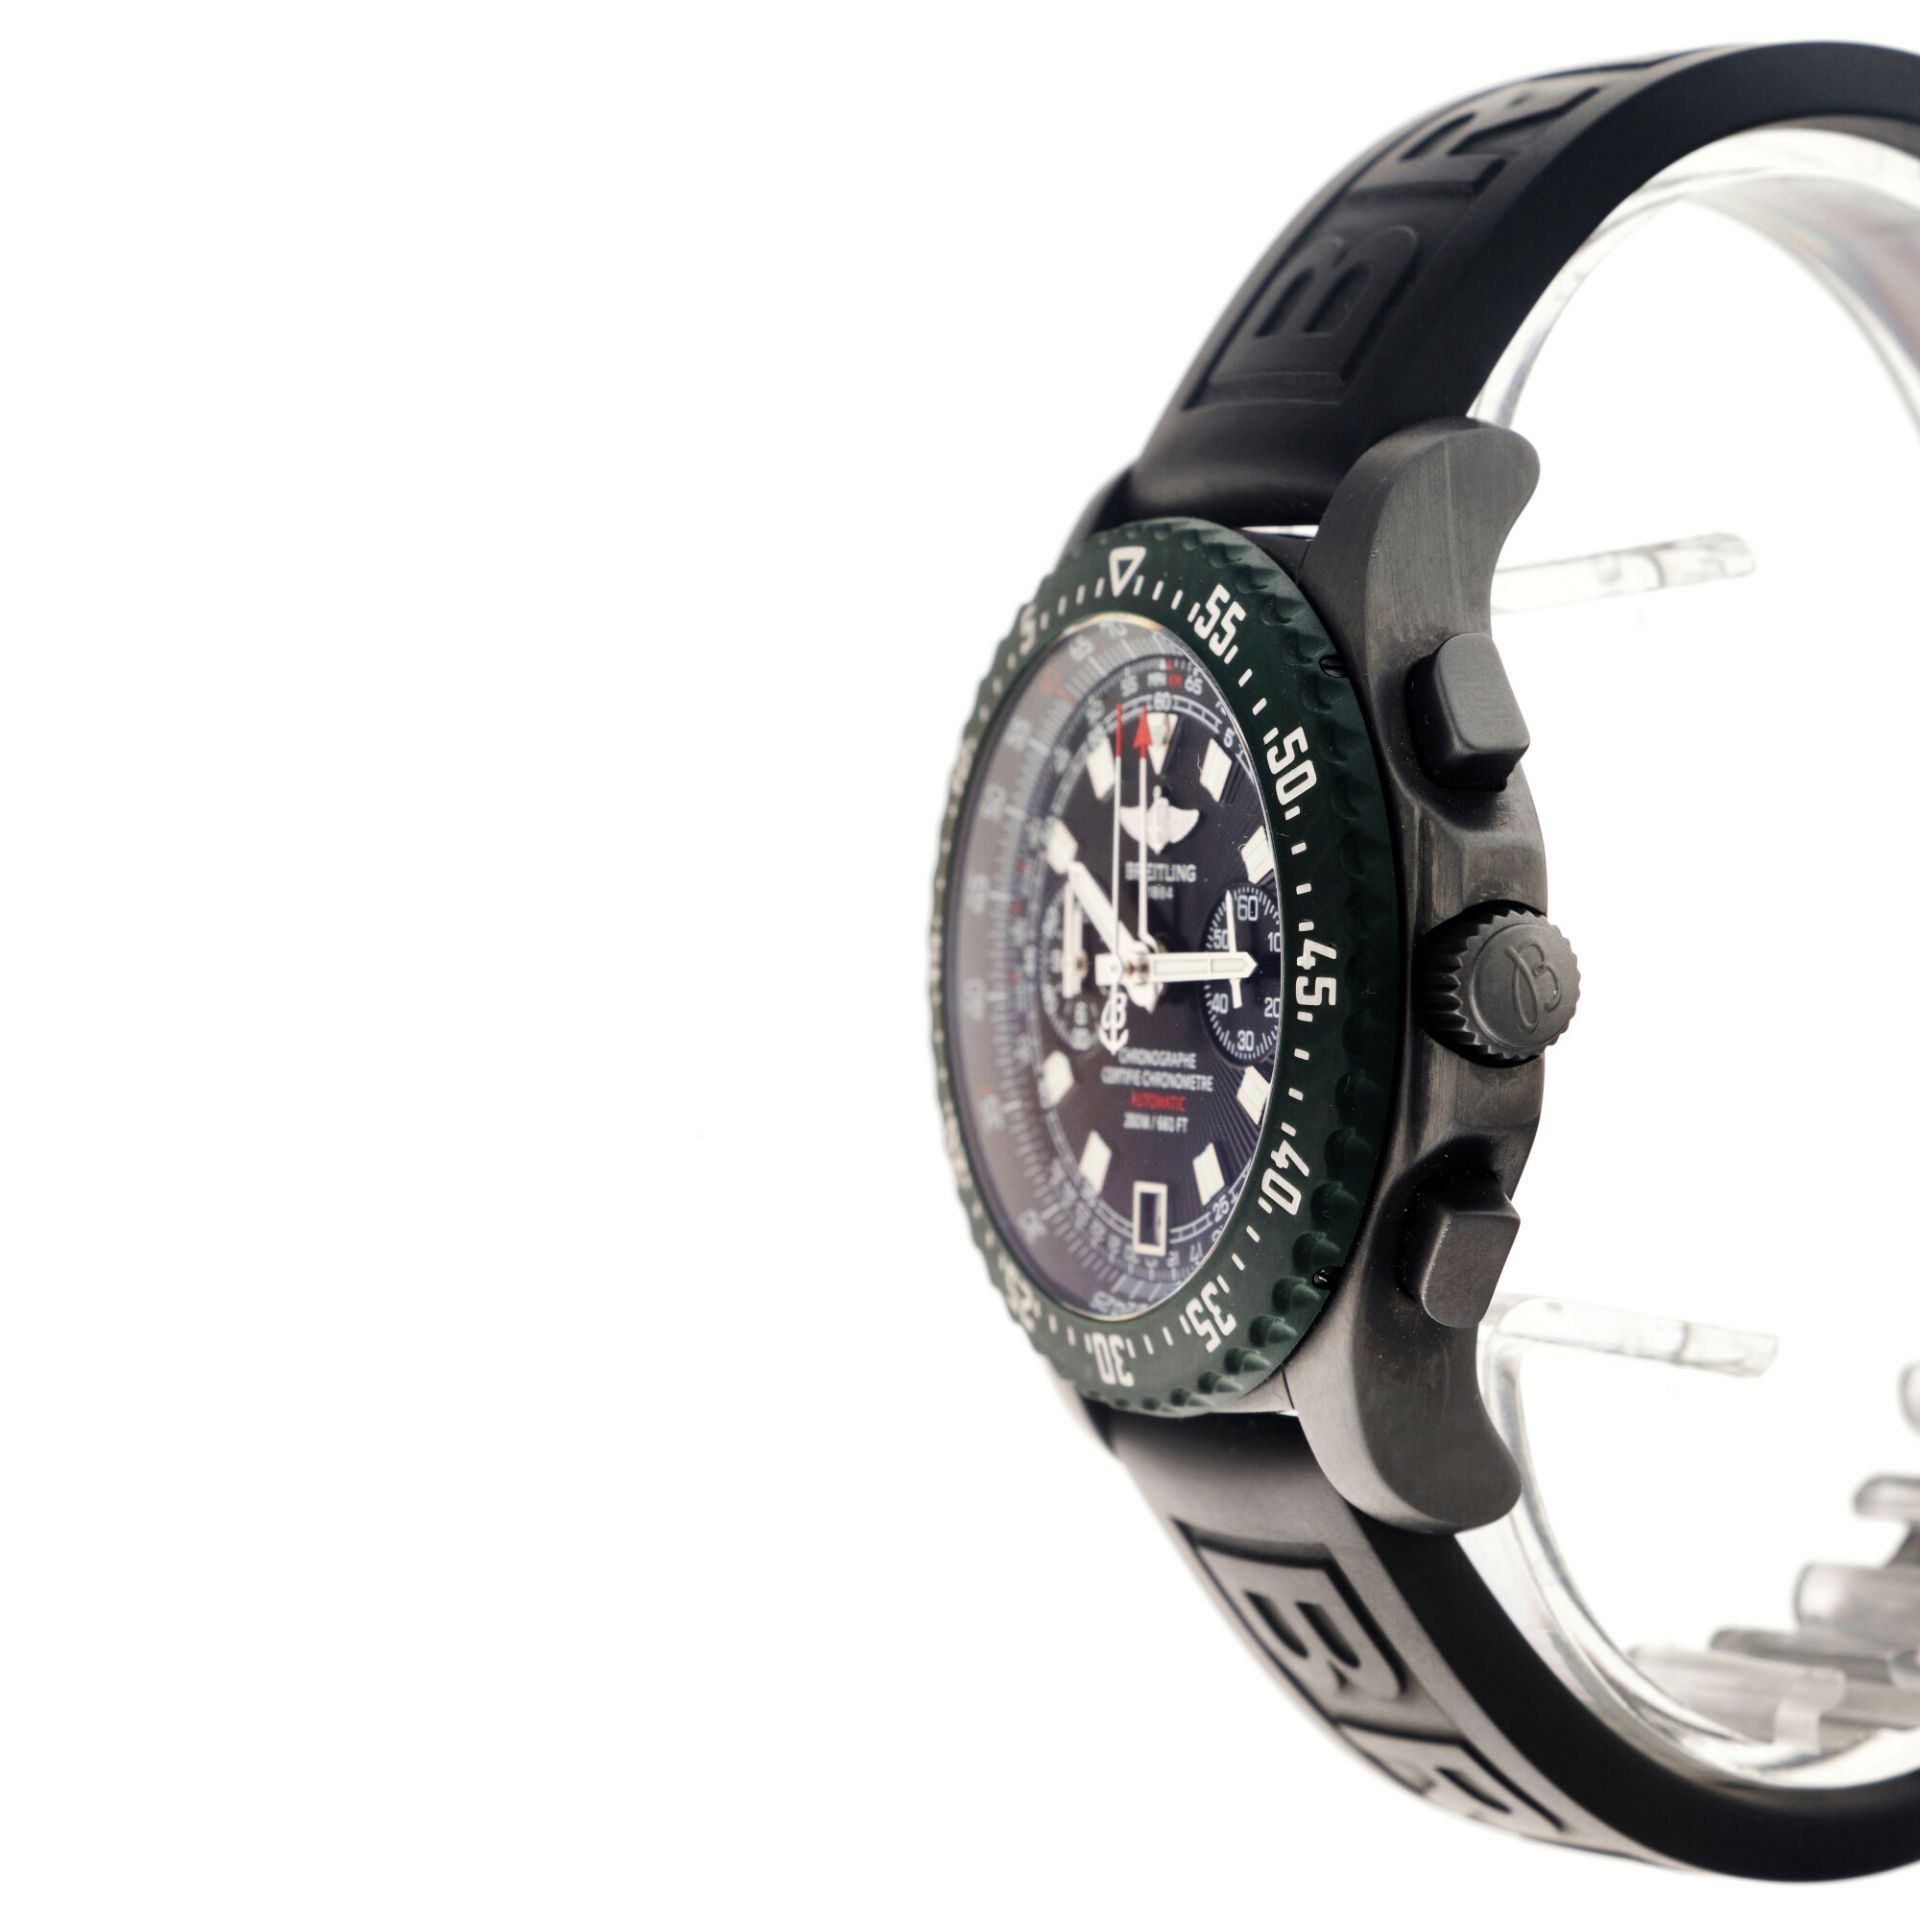 Breitling Skyracer M27363A3/B823 - Men's watch. - Image 5 of 6